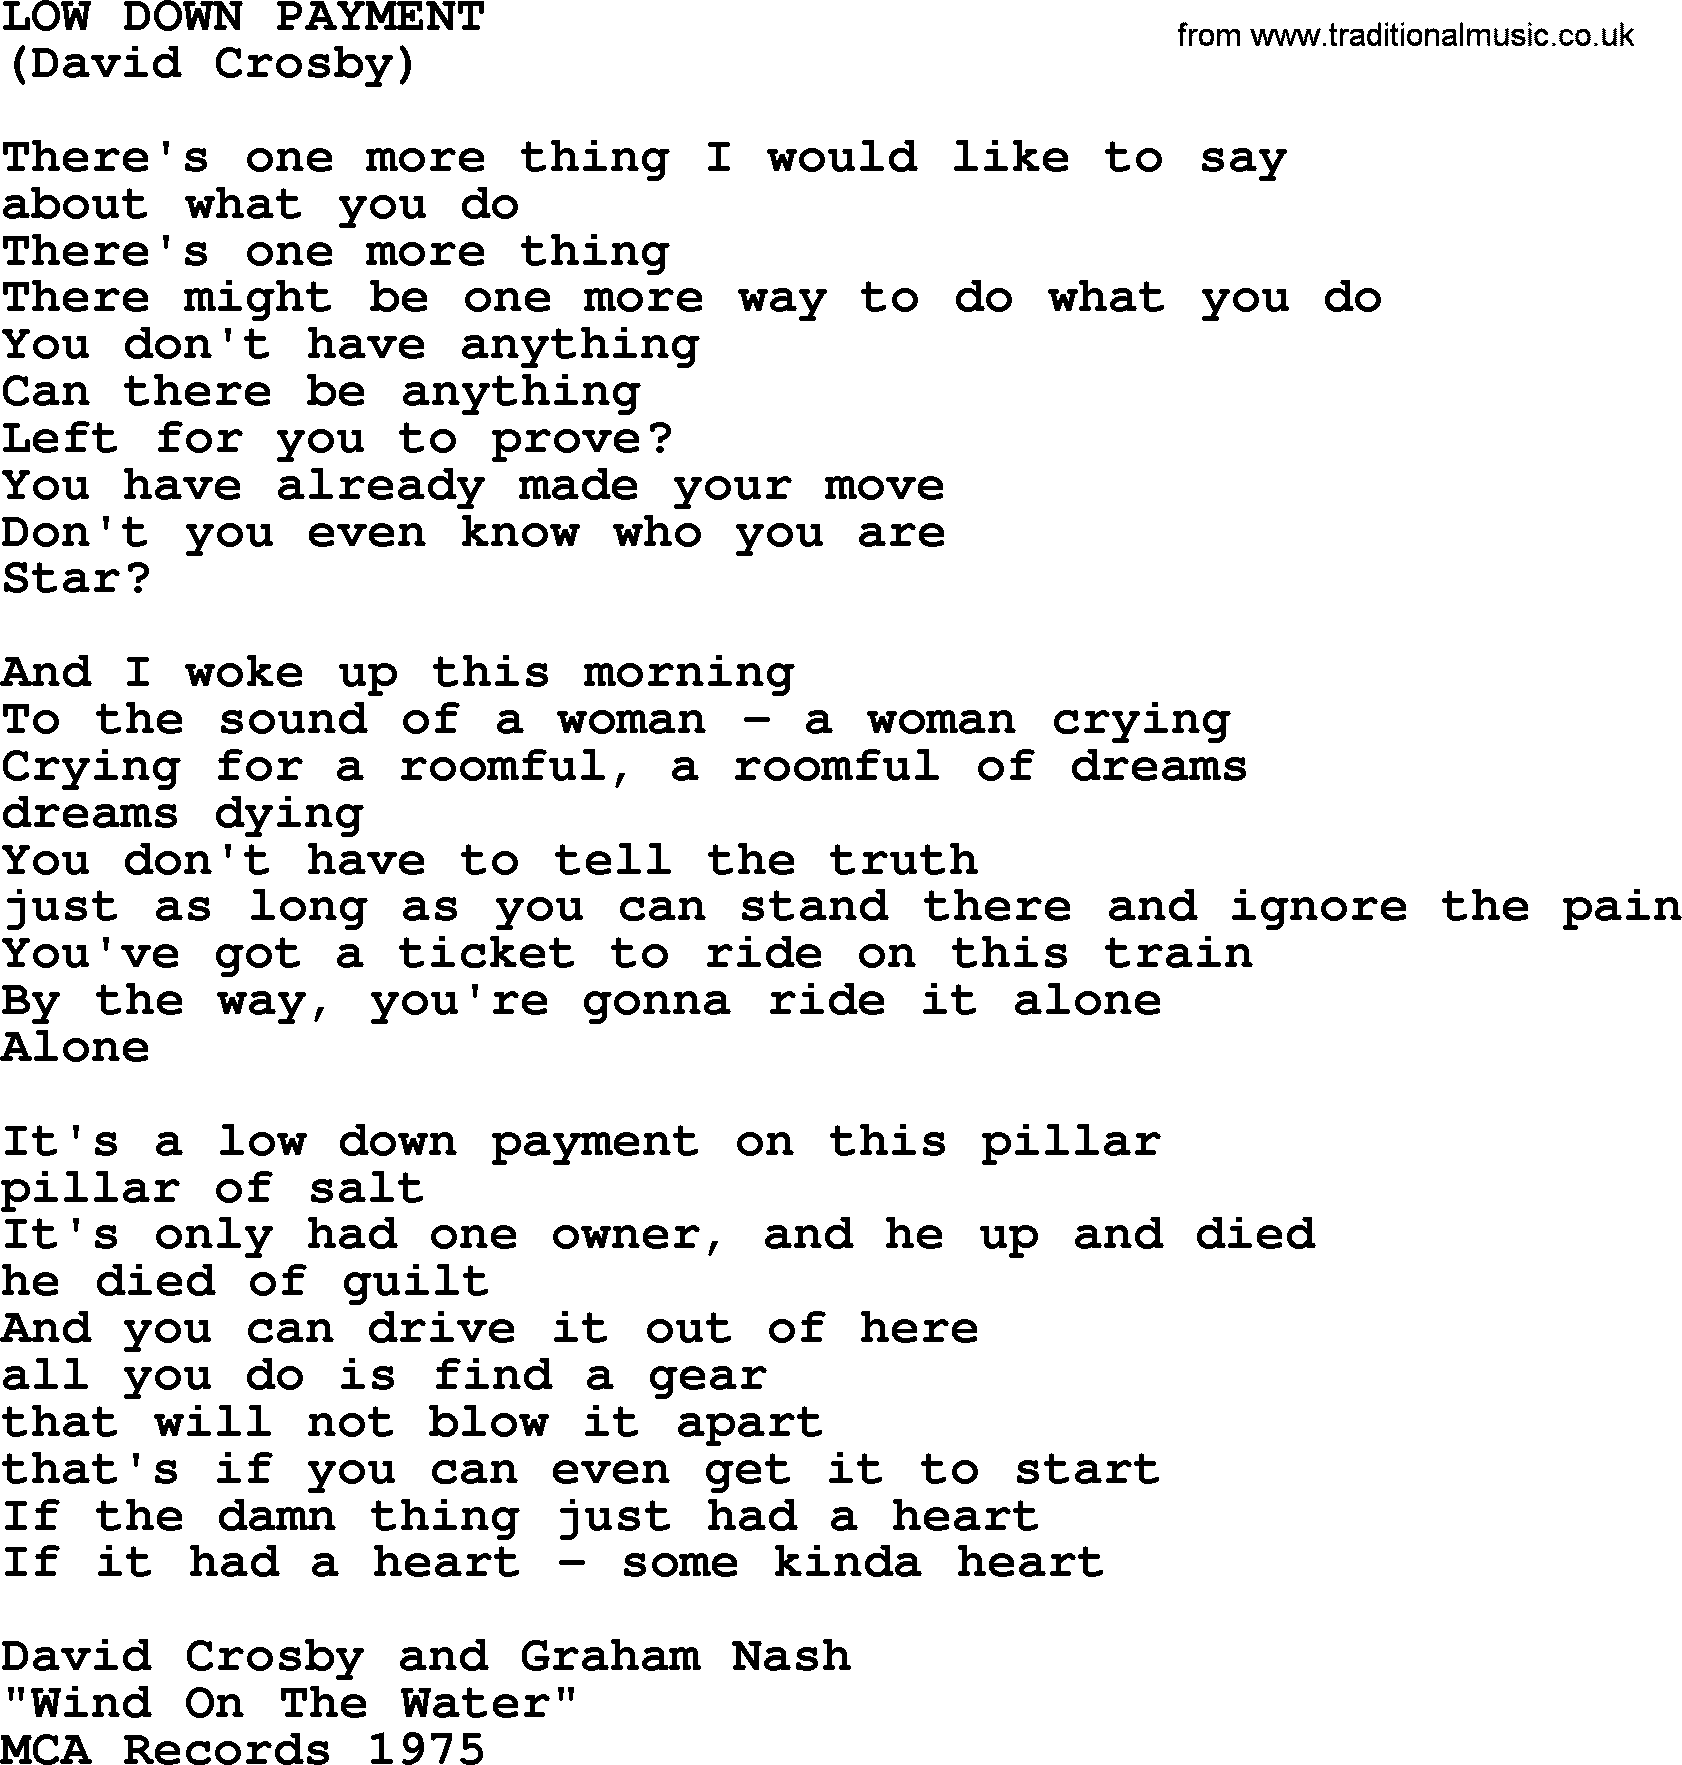 The Byrds song Low Down Payment, lyrics